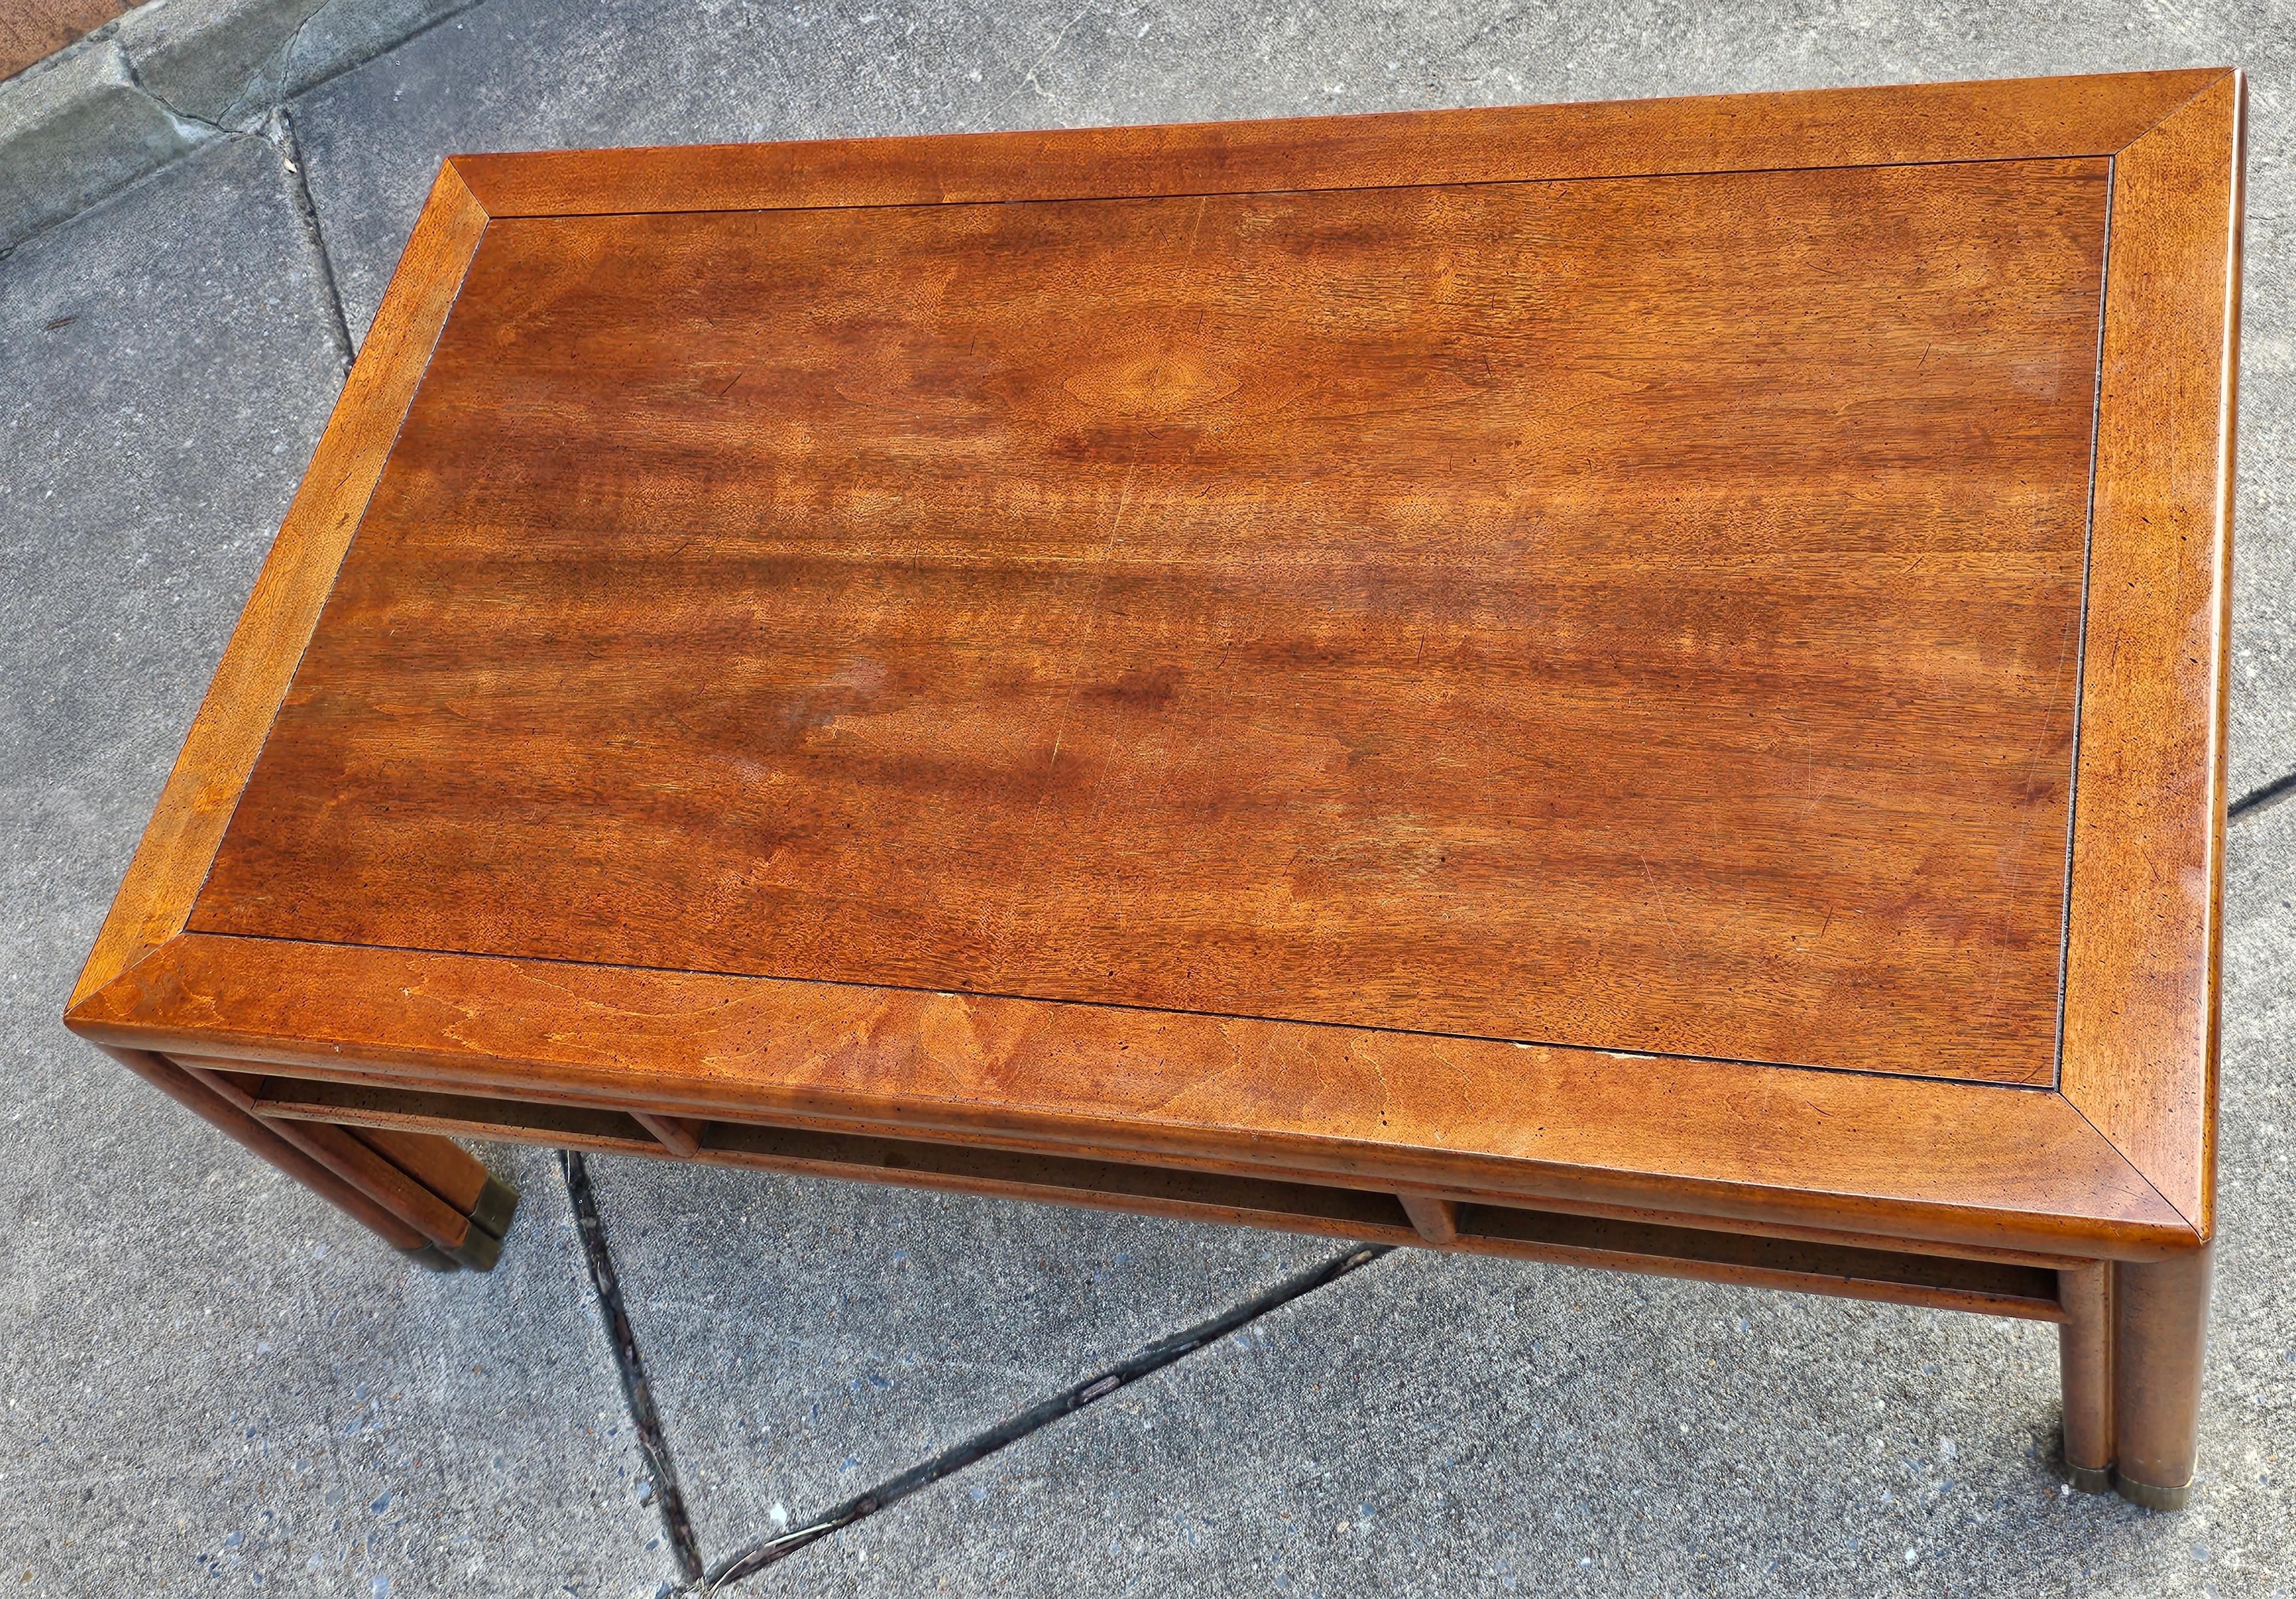 Mid-20th Century Henredon Asian Style Fruitwood and Brass Mounted Feet Coffee Table in good vintage condition. 
Measures 45